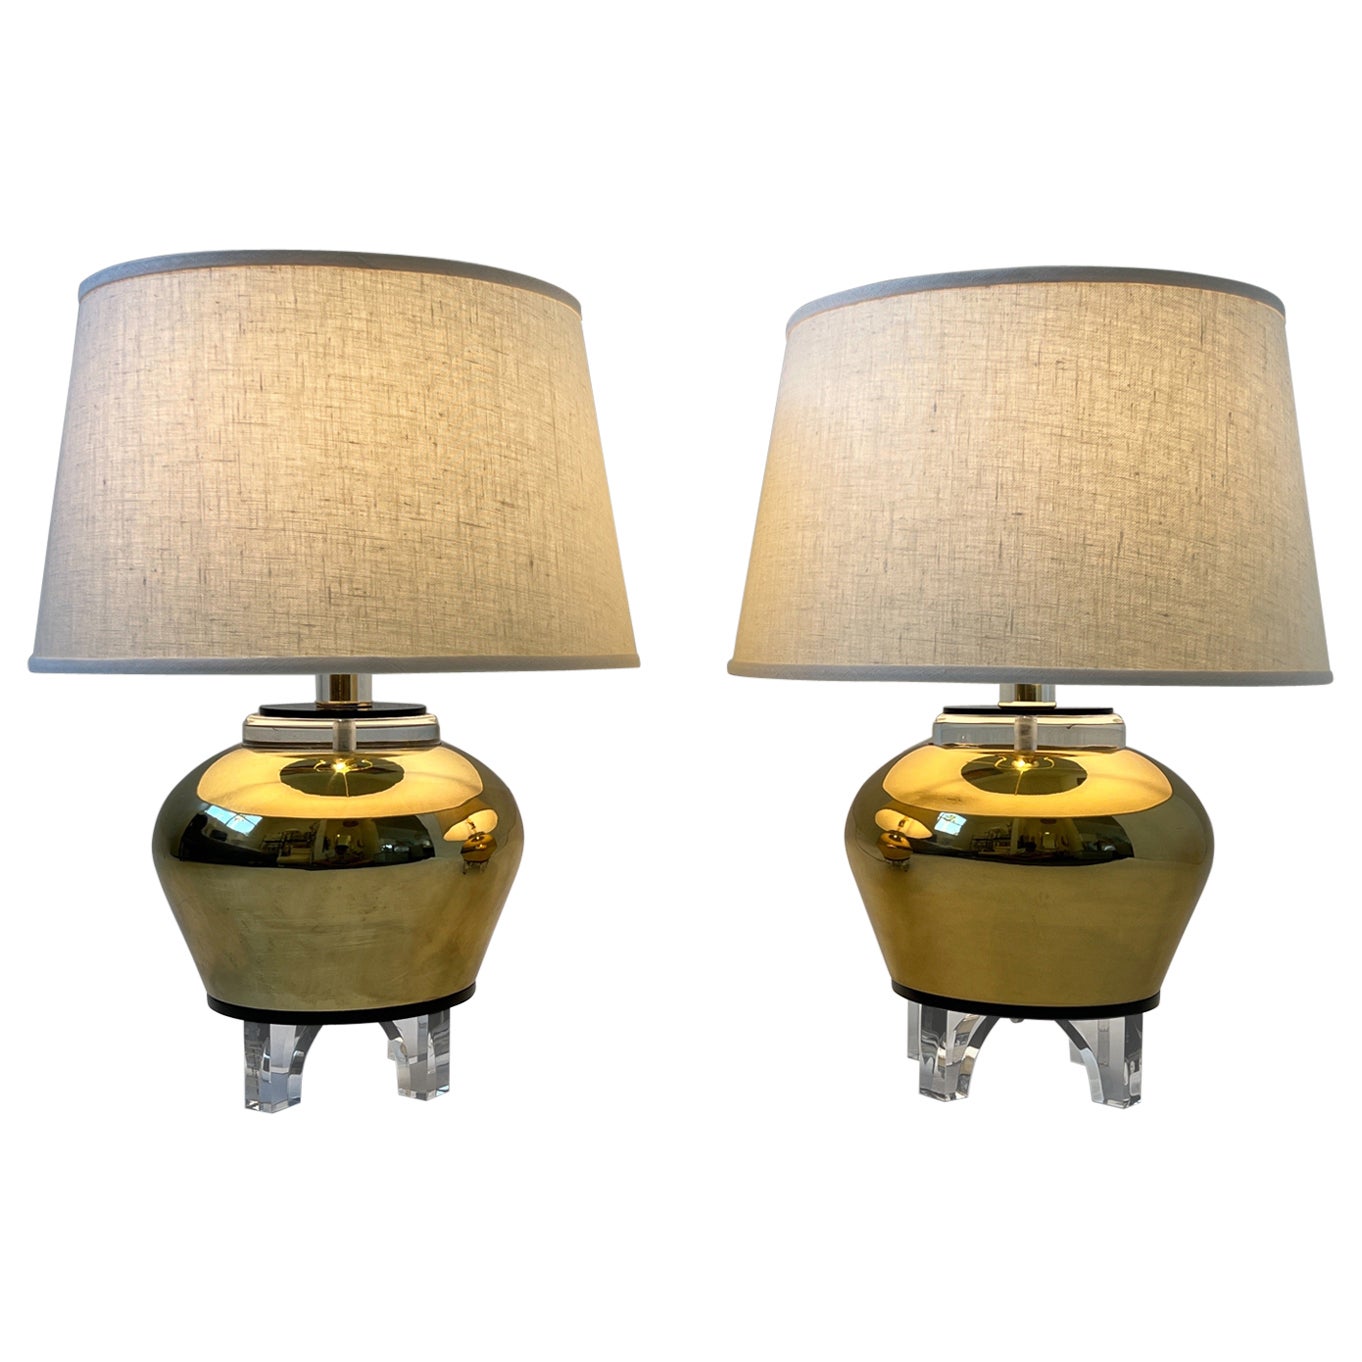 Pair of Brass and Lucite Table Lamps by Bauer Lamp Co